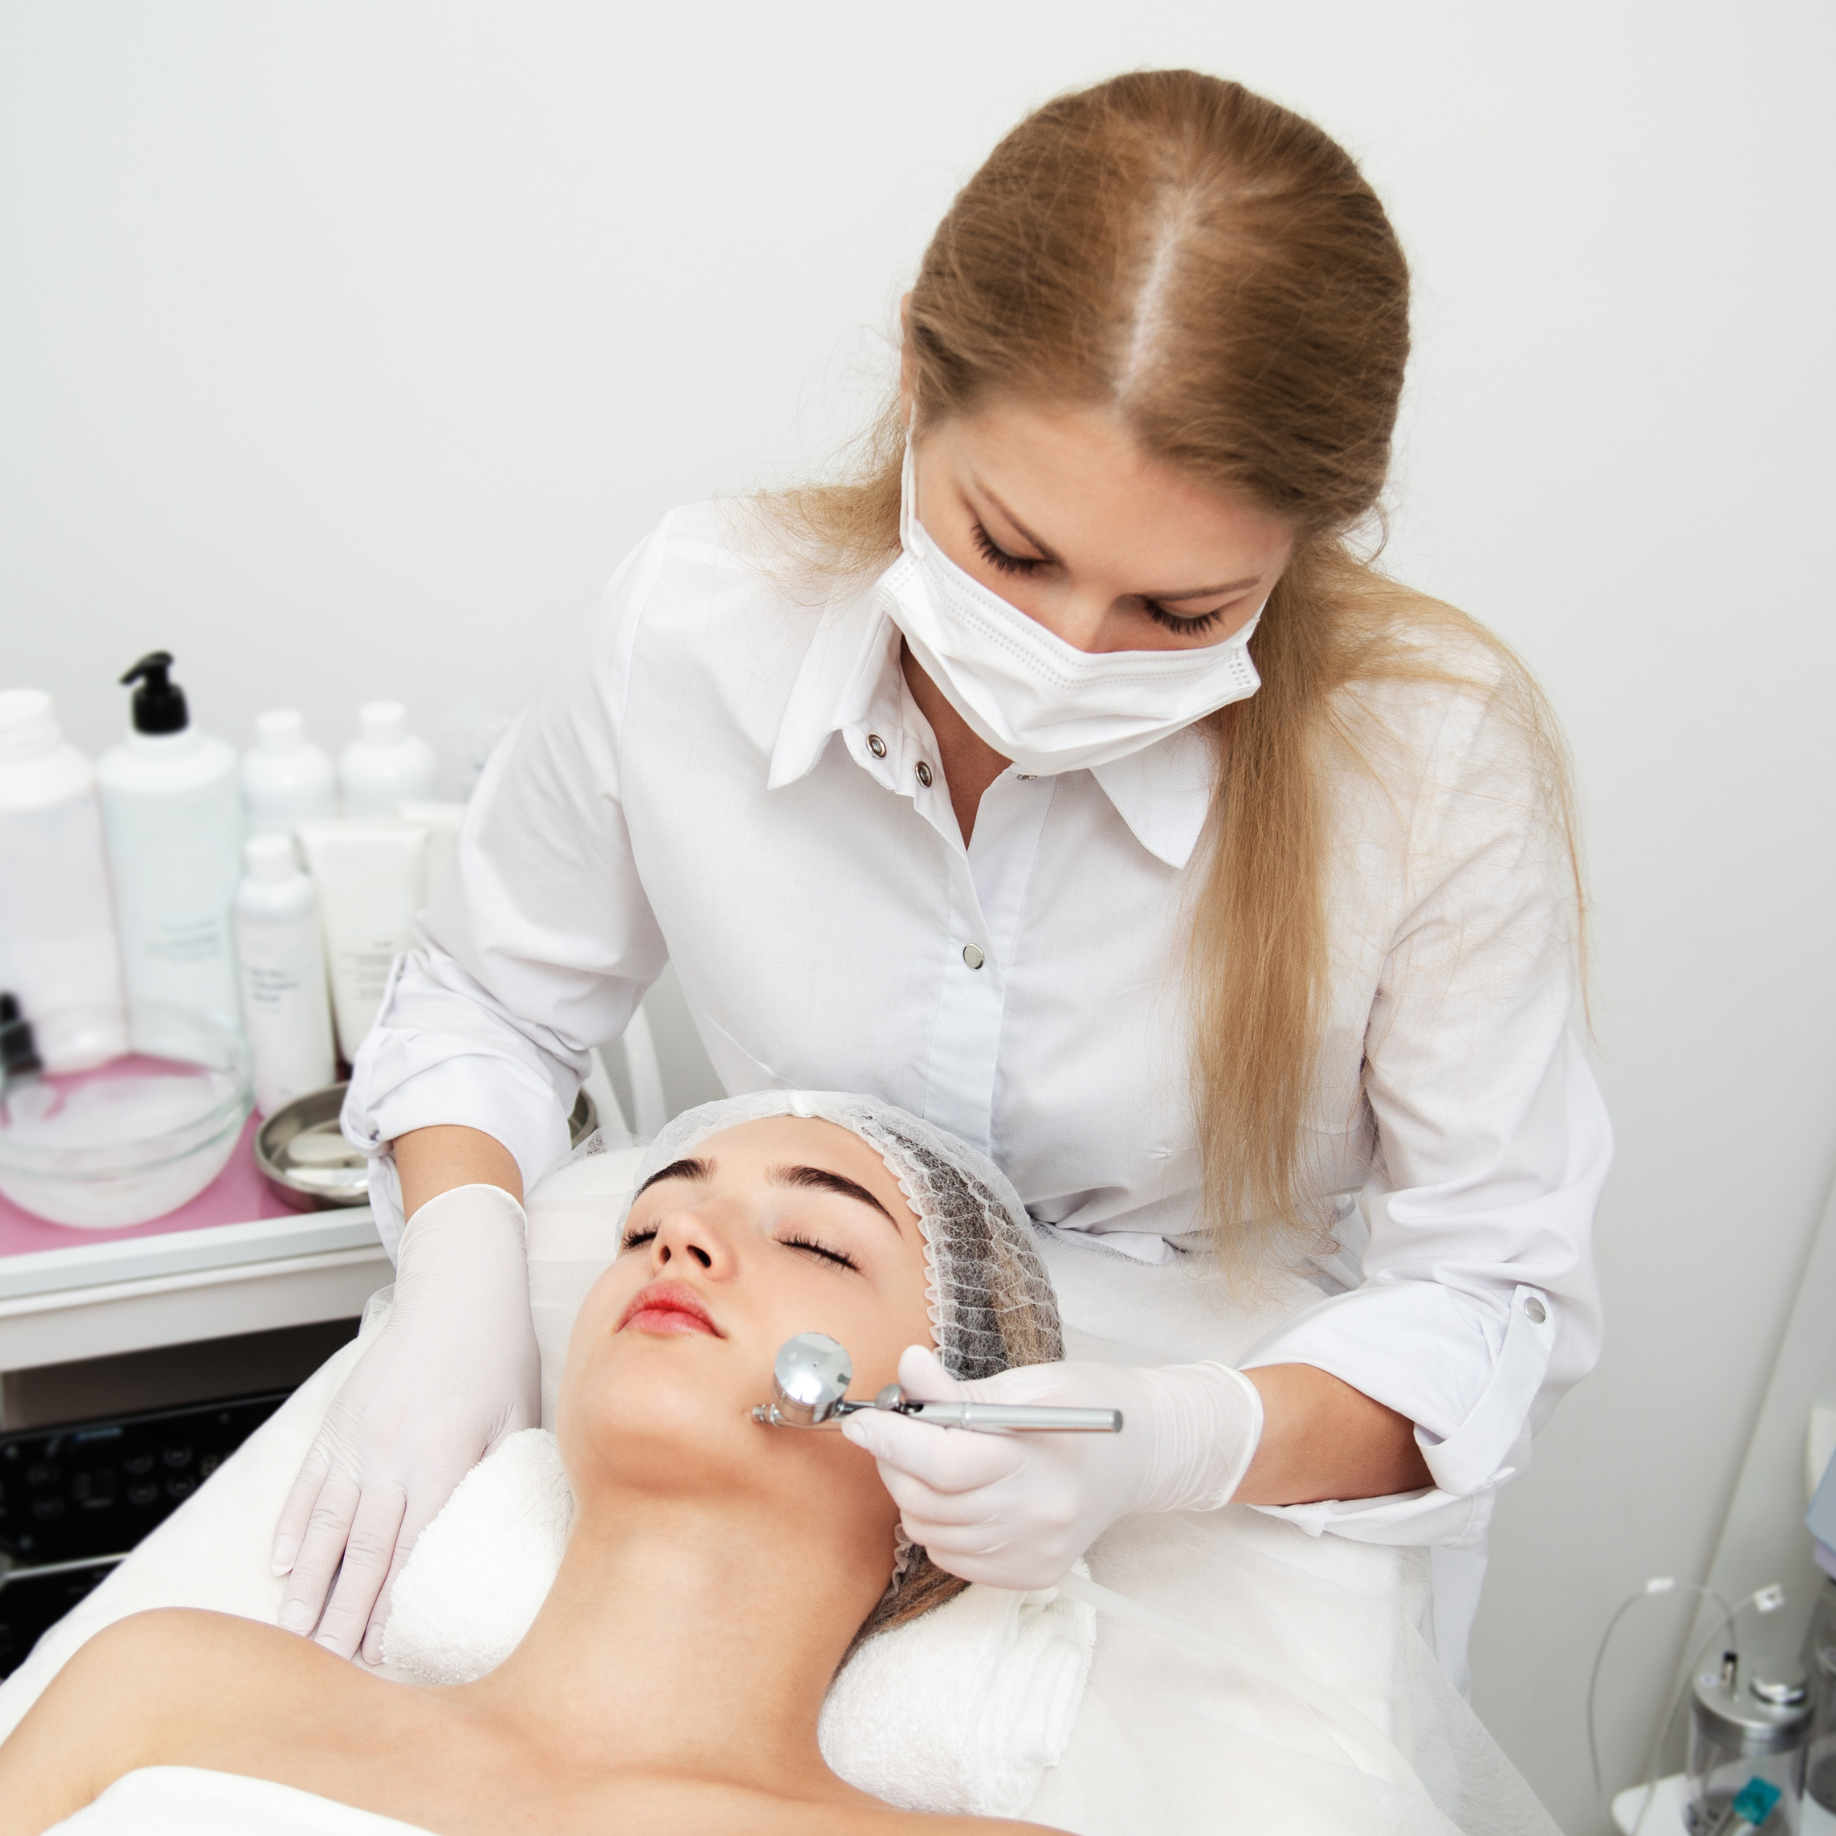 Every Med Spa Should Use CBD in Their Non-Invasive Procedures. Here’s Why.